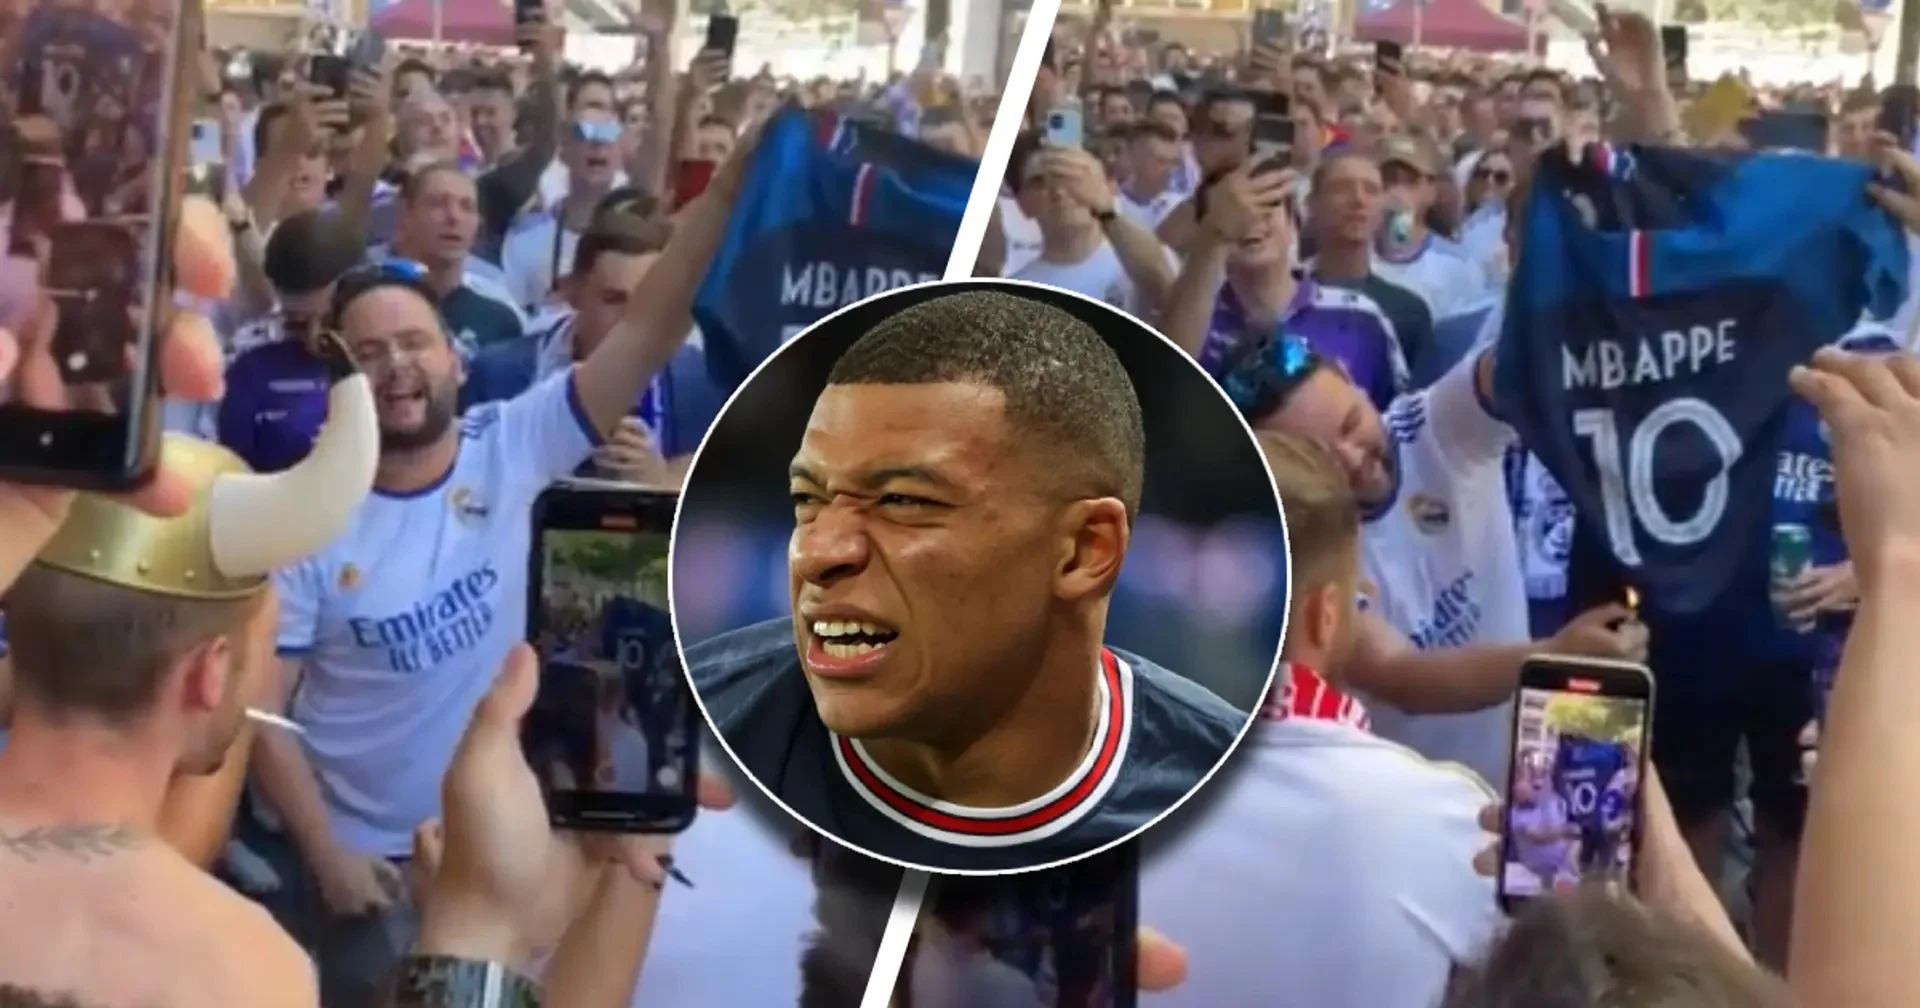 Crazy Real Madrid fans spotted trying to burn Mbappe jersey in France